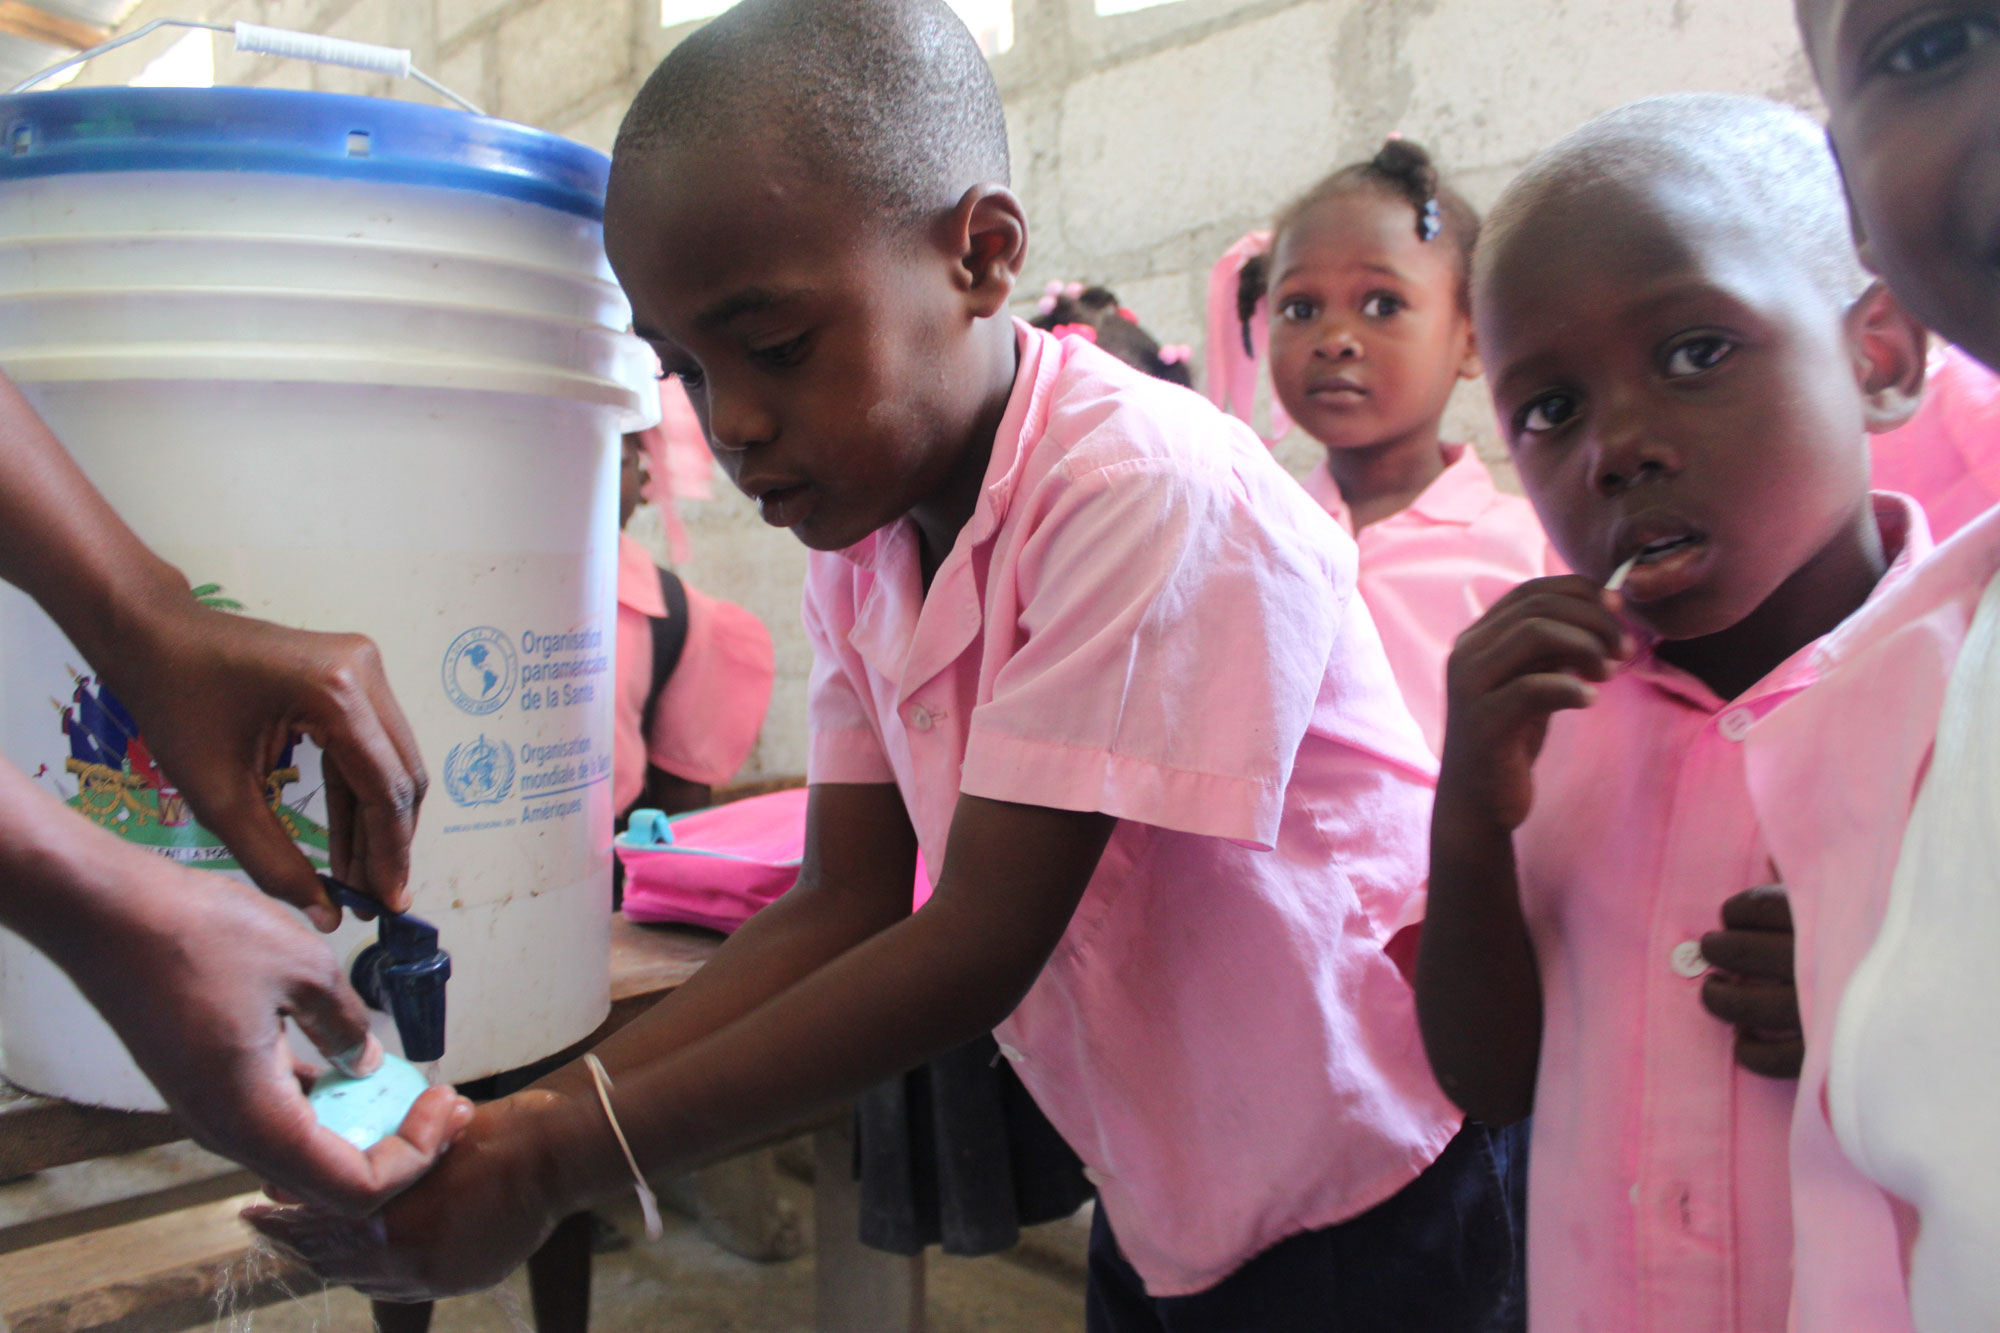 A group of Haitian children learn how to properly wash their hands in an effort to raise awareness about cholera prevention. UN Photo/ Logan Abassi